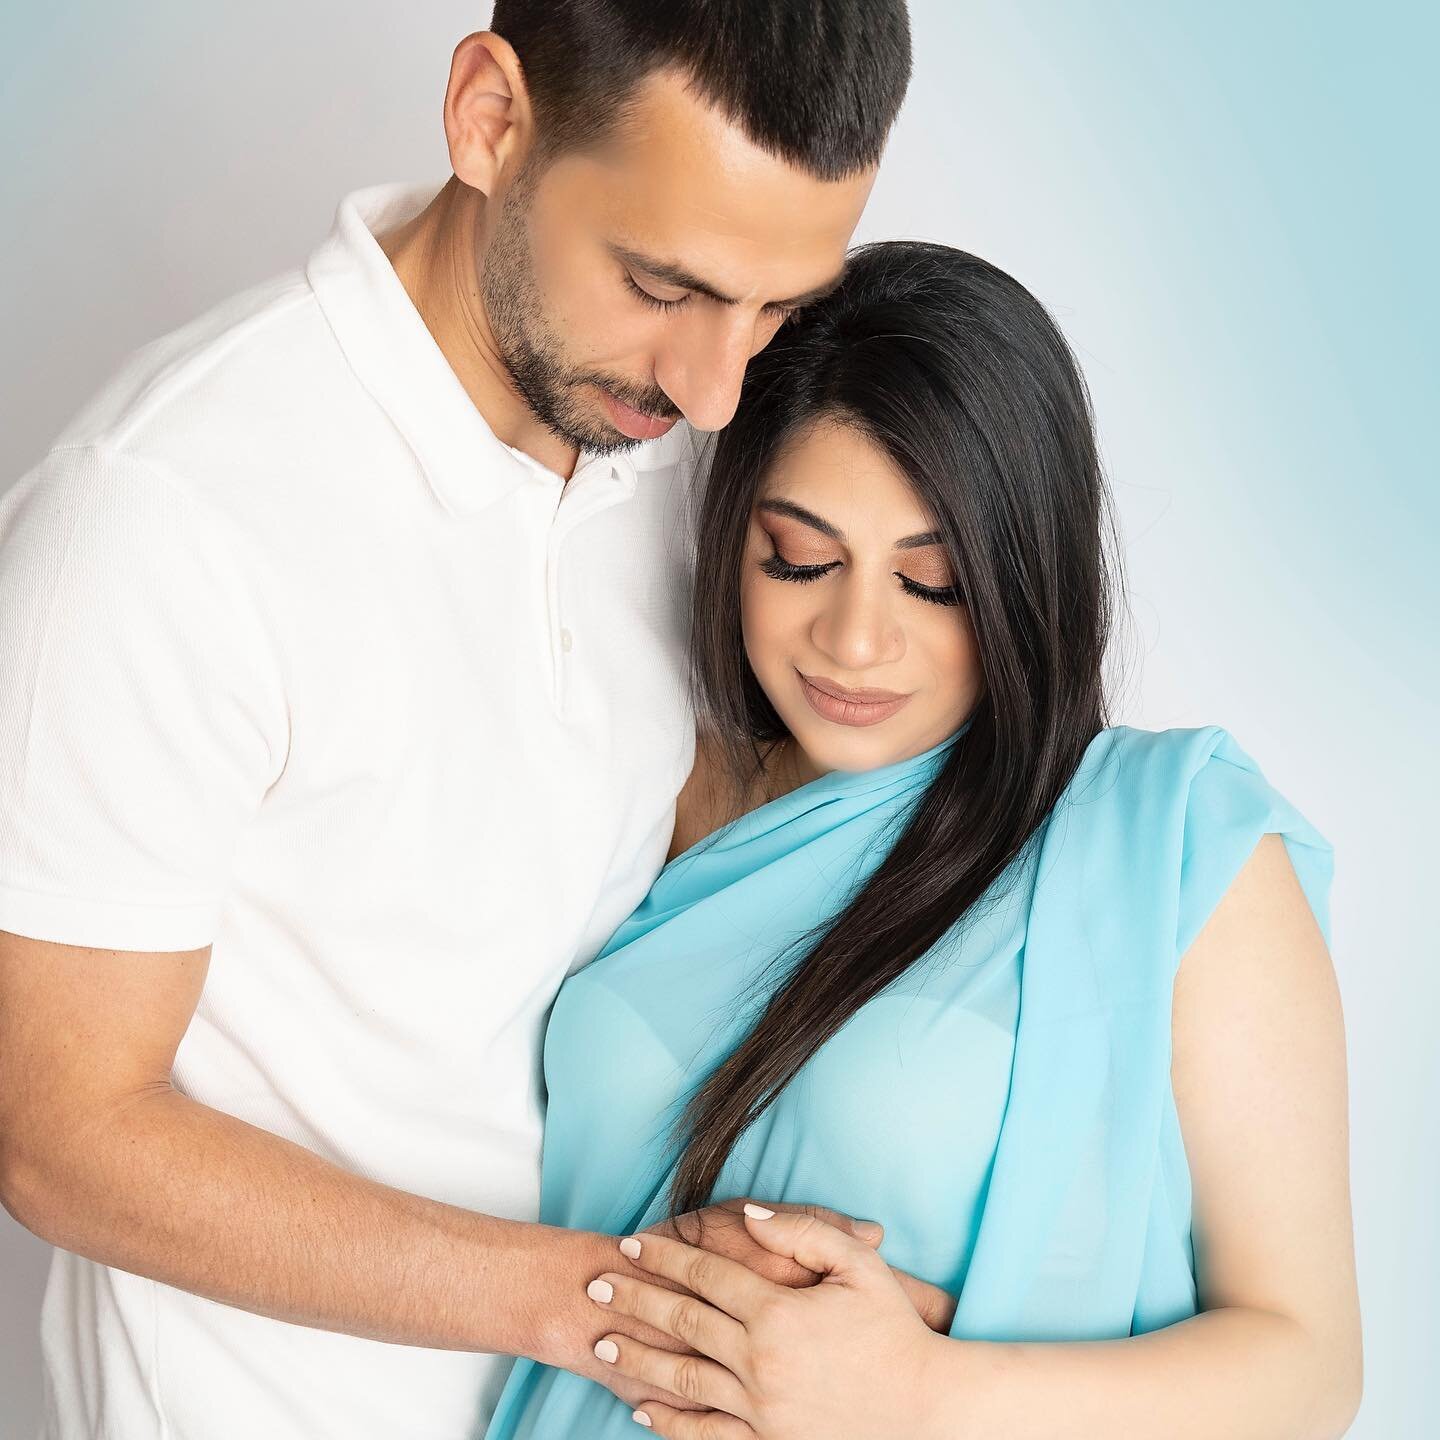 The greatest gift 💝 

Book a pregnancy session !! 
Bookings: +96170415050 or click the CONTACT BUTTON 

#newborns#newbornphotography #newbornworkshop #newbornphotographer #pregnancyphotoshoot #pregnancyphotography #maternityphotography #babyphotogra